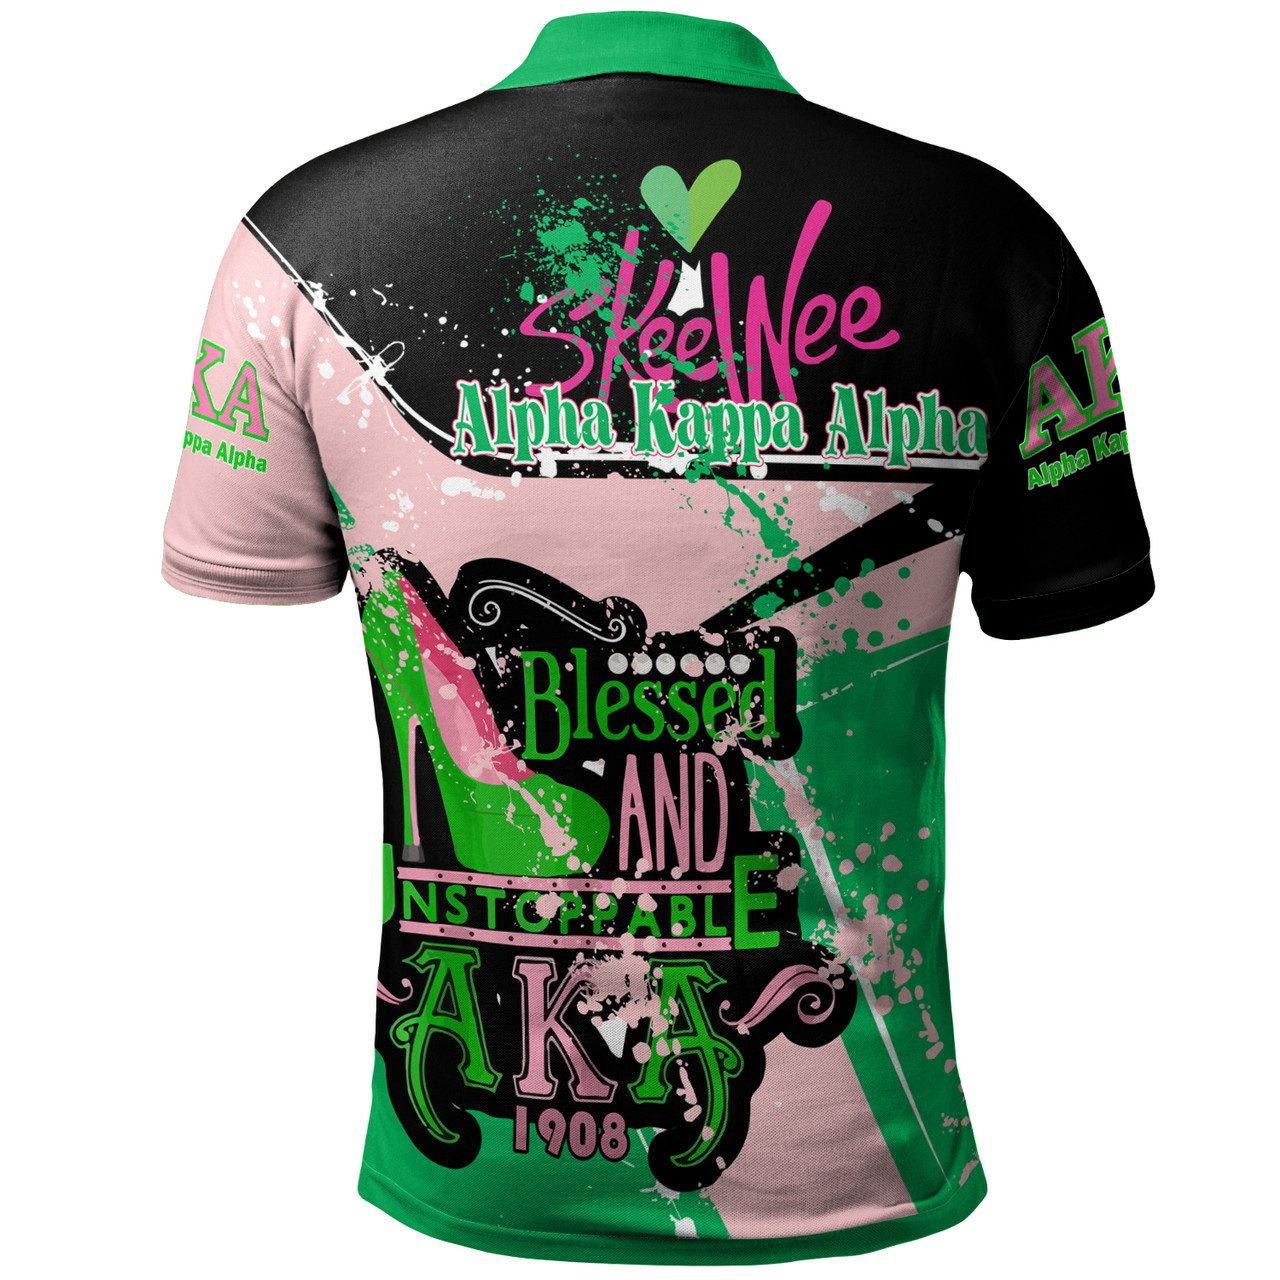 Alpha Kappa Alpha Polo Shirt – Alpha Kappa Alpha Sorority Blessed And Unstoppable 1908 Splash Style Polo Shirt